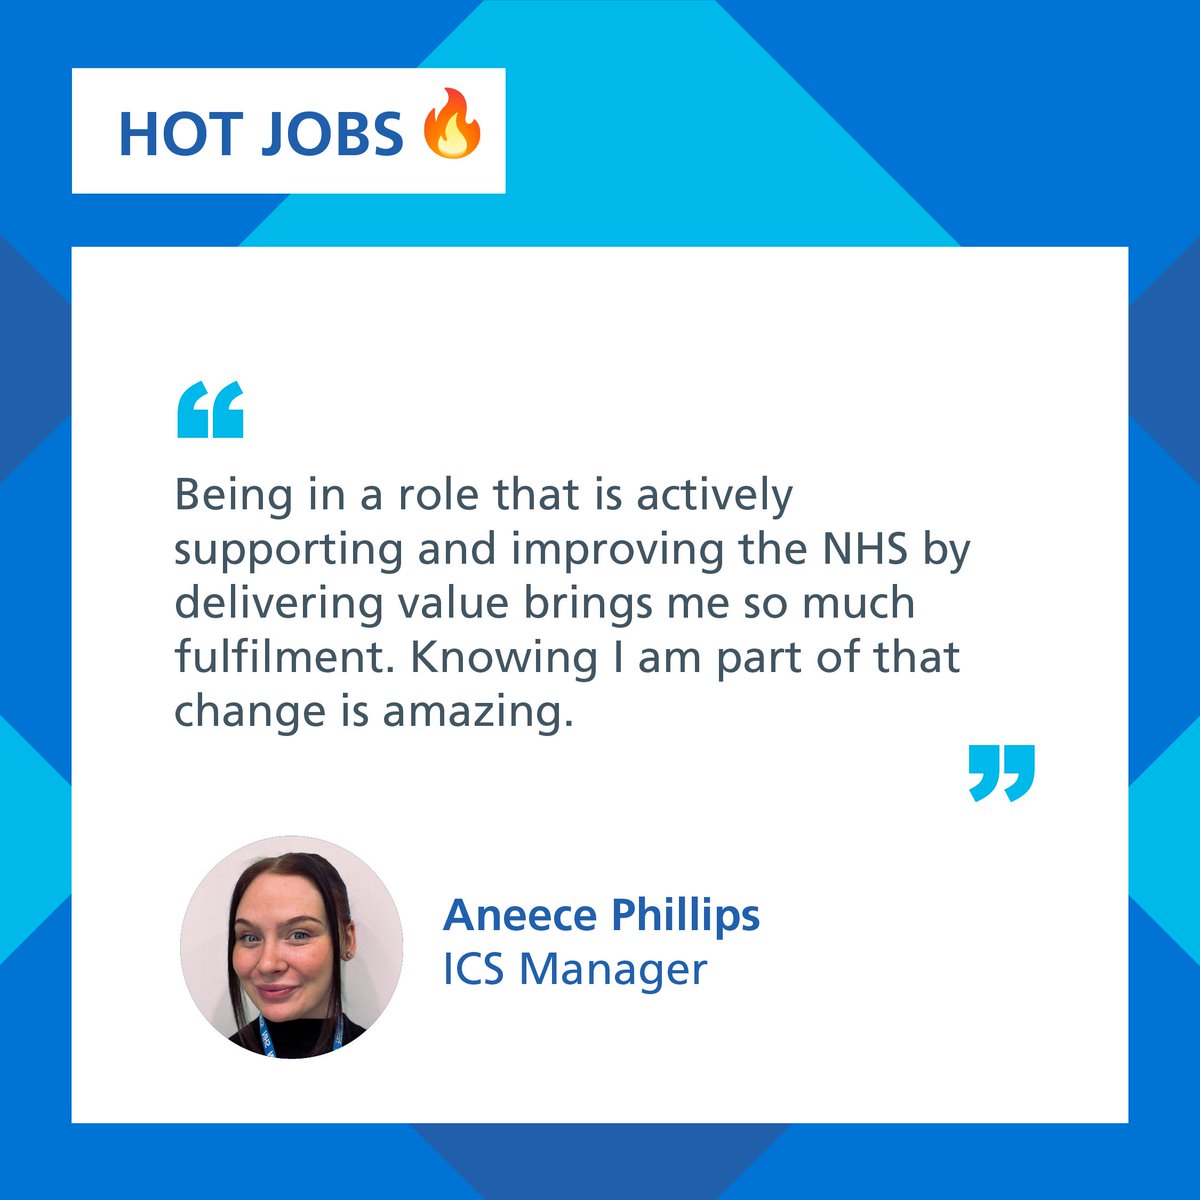 🔥 HOT JOBS 🔥 This week's #HotJob is Integrated Care Systems Manager (ICS) . We asked Aneece, who joined us in January, what this role means to her... Read more and apply here: ow.ly/3fgJ50R6pbH #LifeAtNHSSupplyChain #Recruiting #ICSManager #Jobs